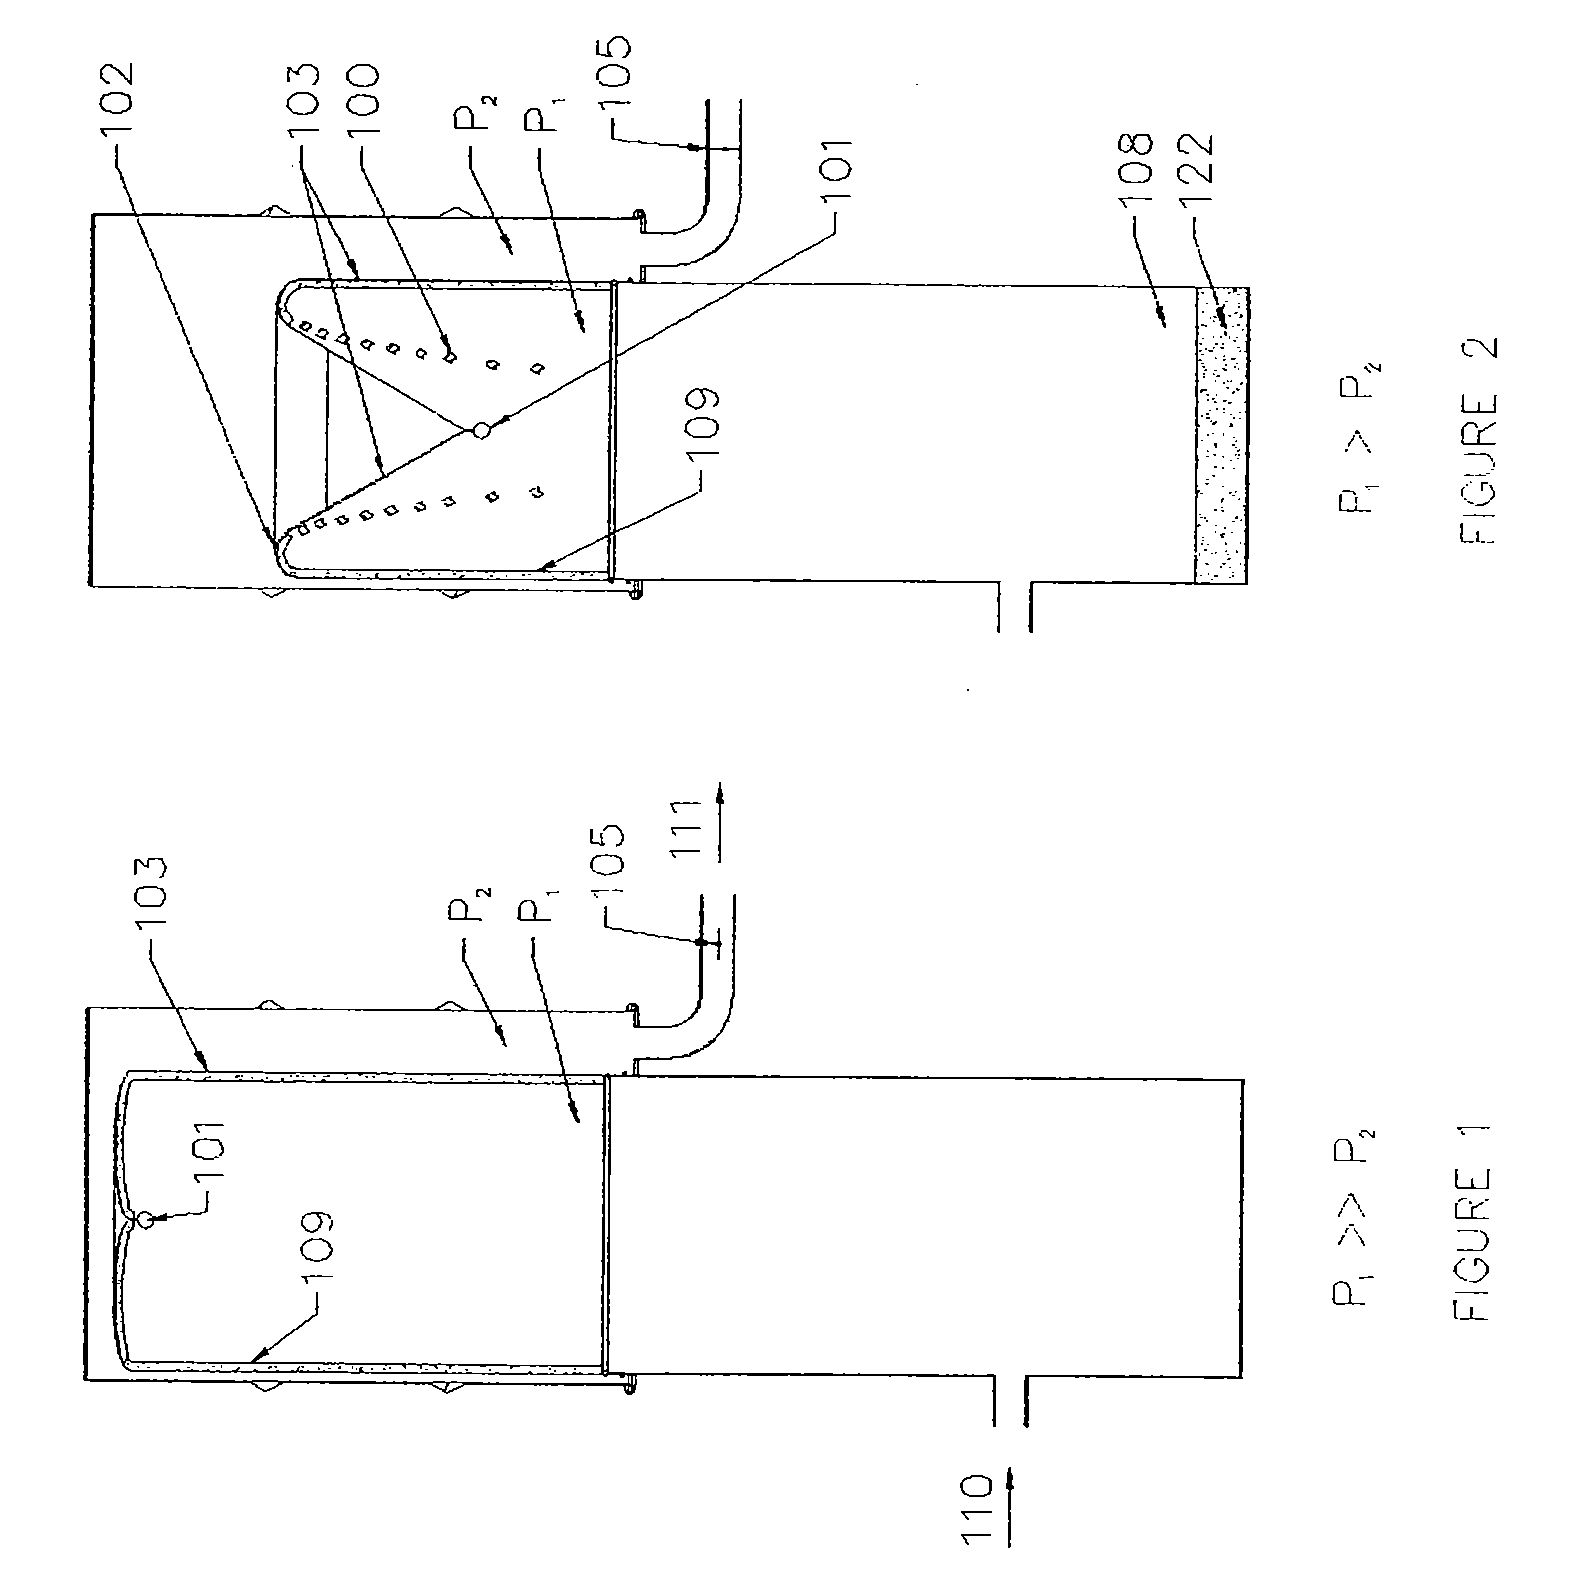 Method and Apparatus for a Self-Cleaning Filter